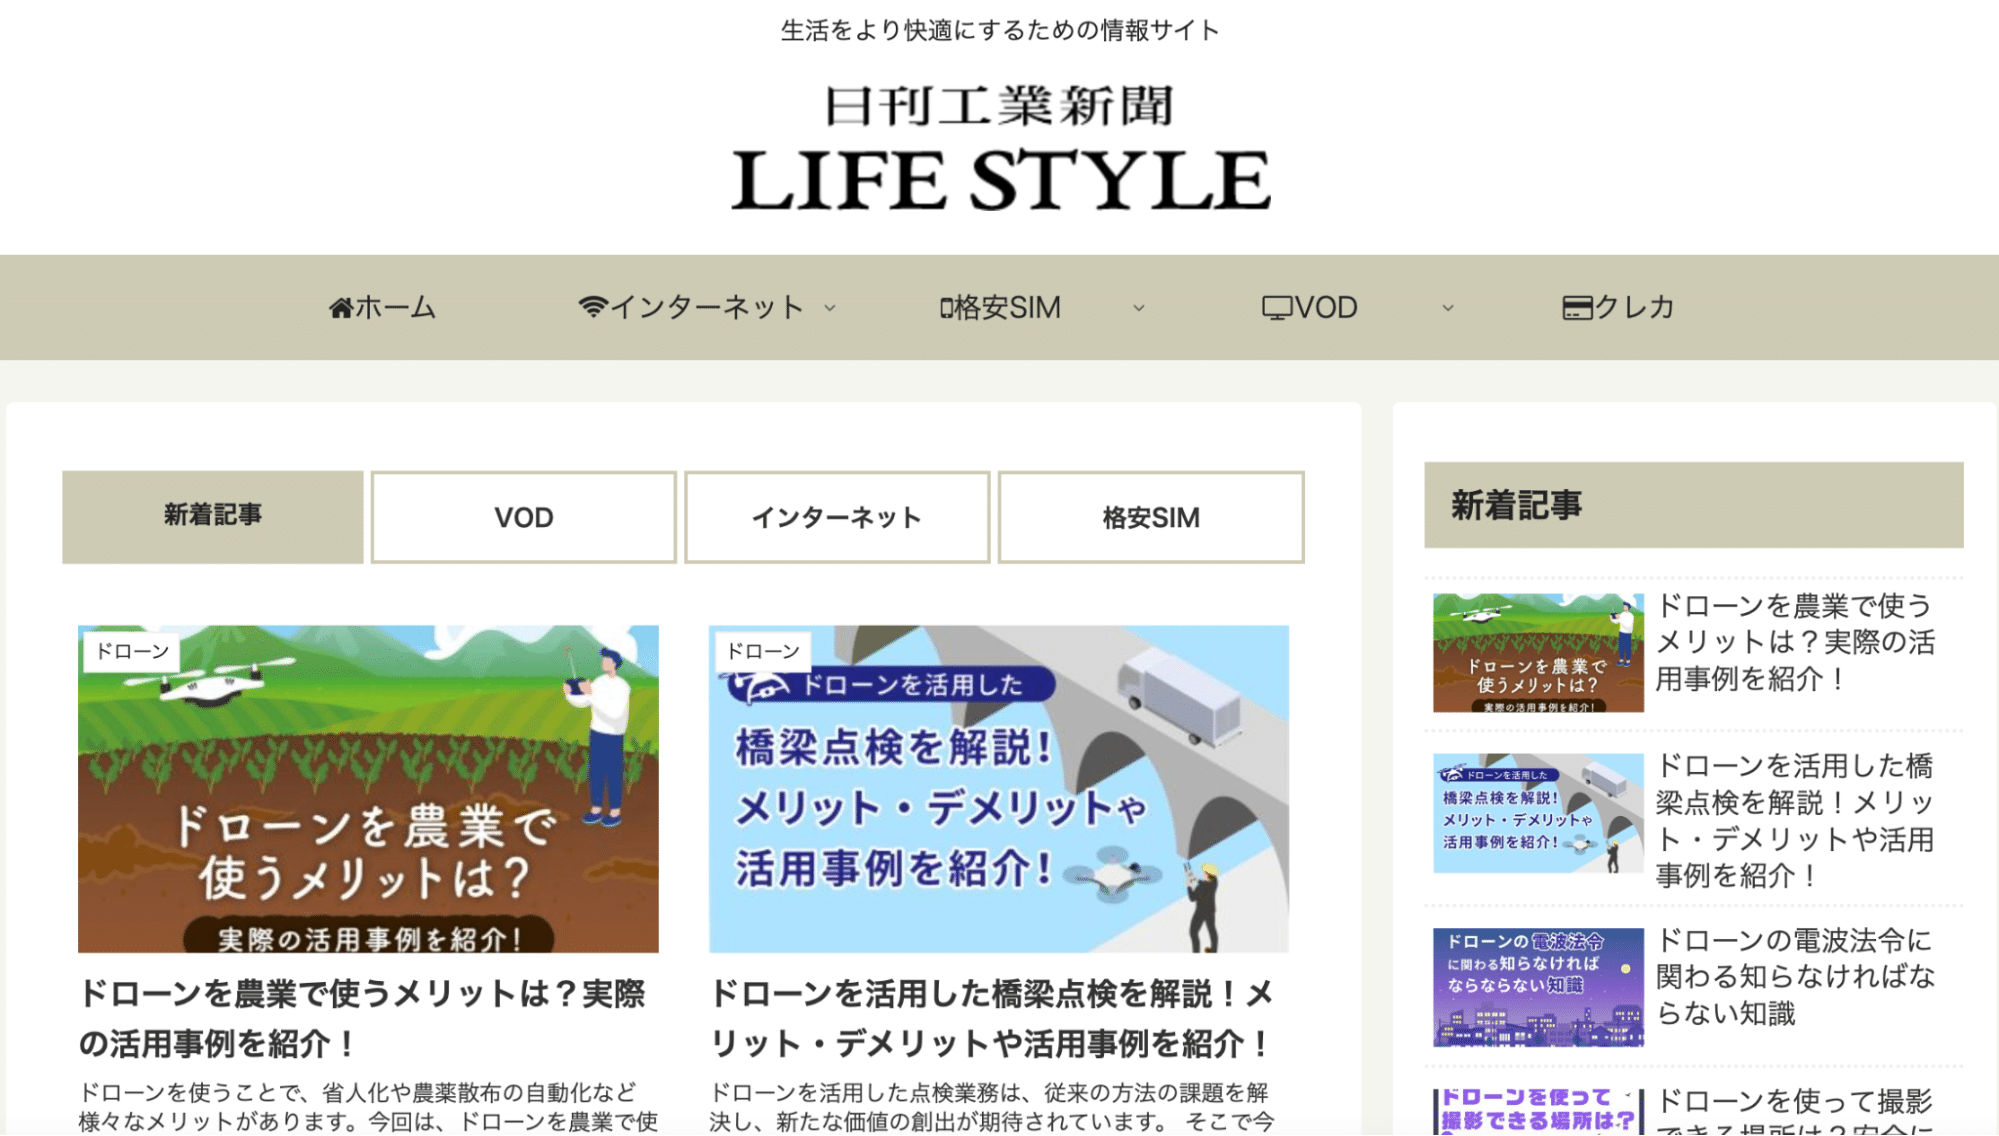 LIFE STYLE by 日刊工業新聞社